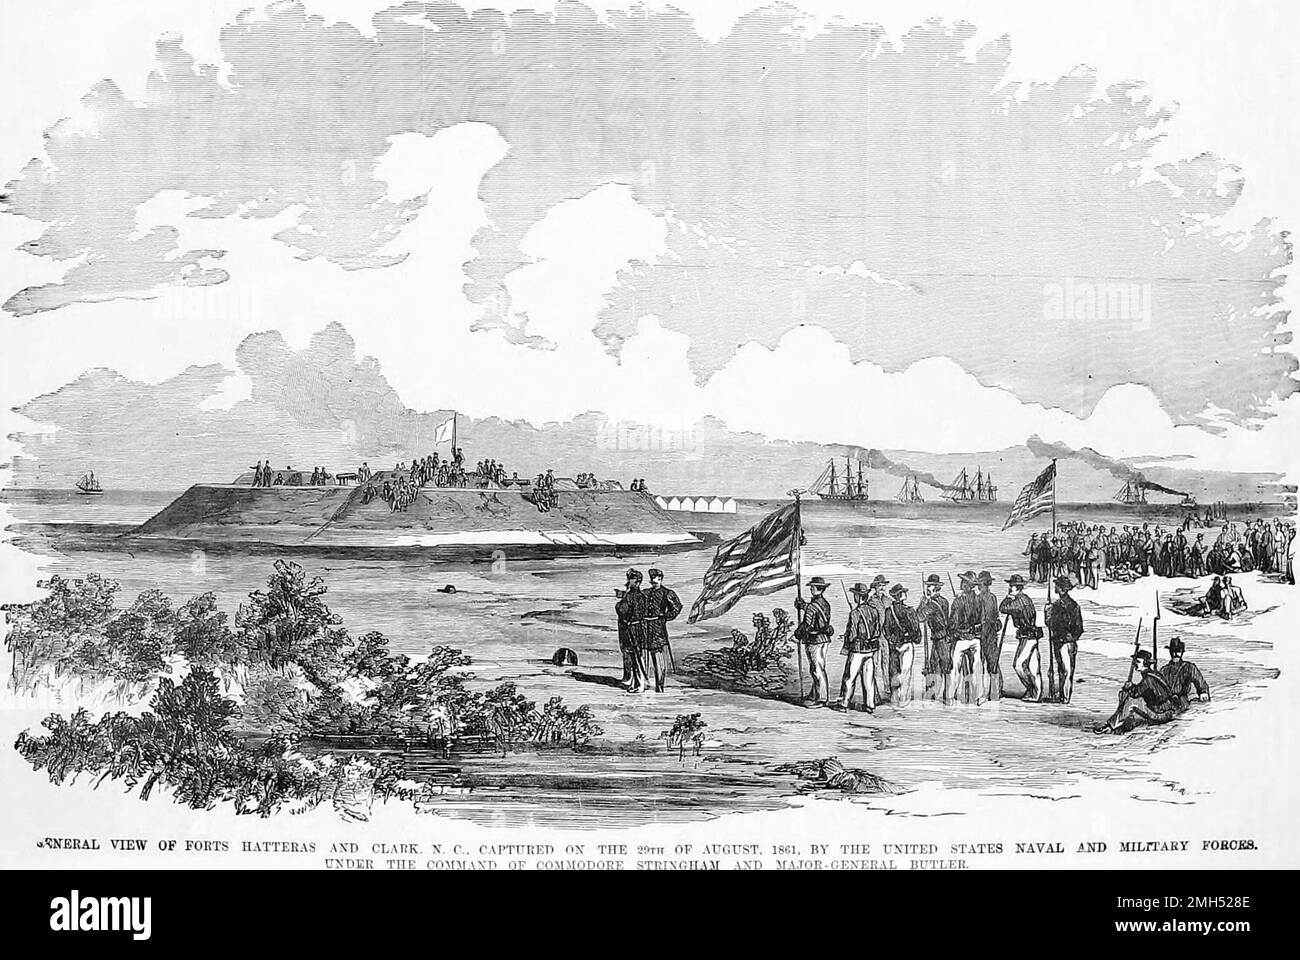 The Battle of Hatteras Inlet Batteries was a combined operation of the Union Army and Navy that took place in North Carolina on 28-29th August 1861. It was won by the Unionist forces who captured the forts at Cape Hatteras. Stock Photo